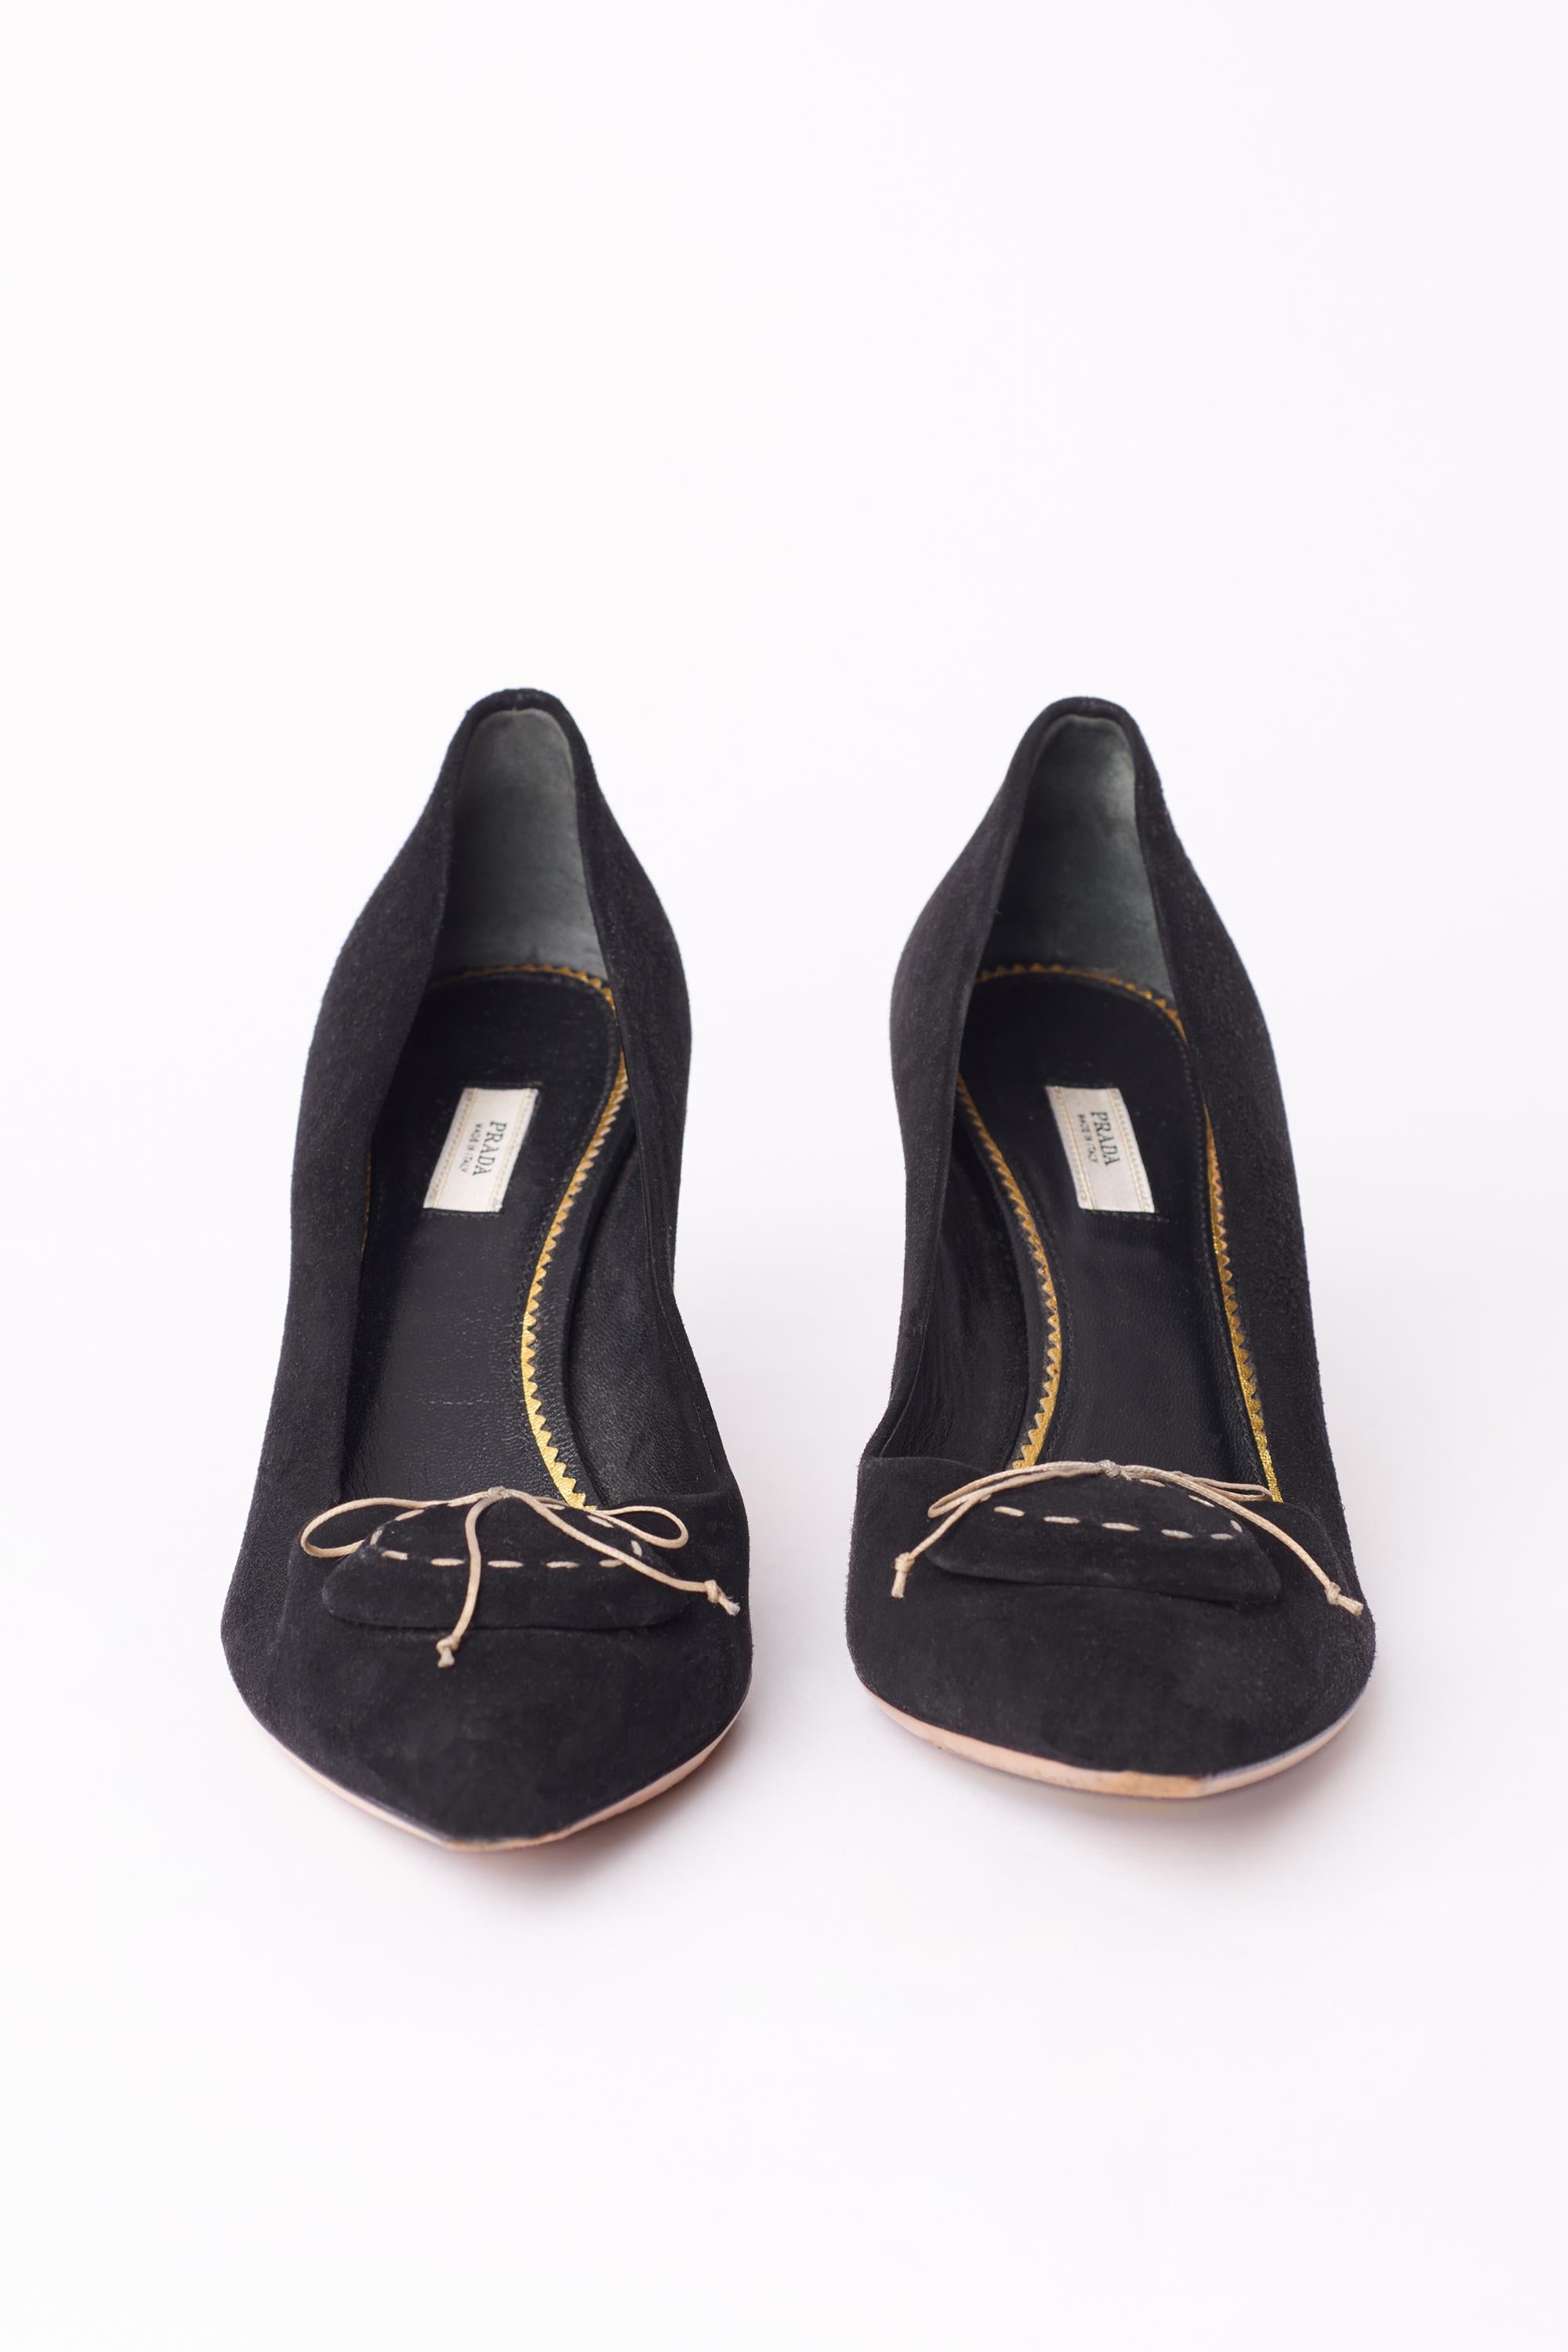 Vintage 2000's Black Suede Pumps Heels In Excellent Condition For Sale In London, GB